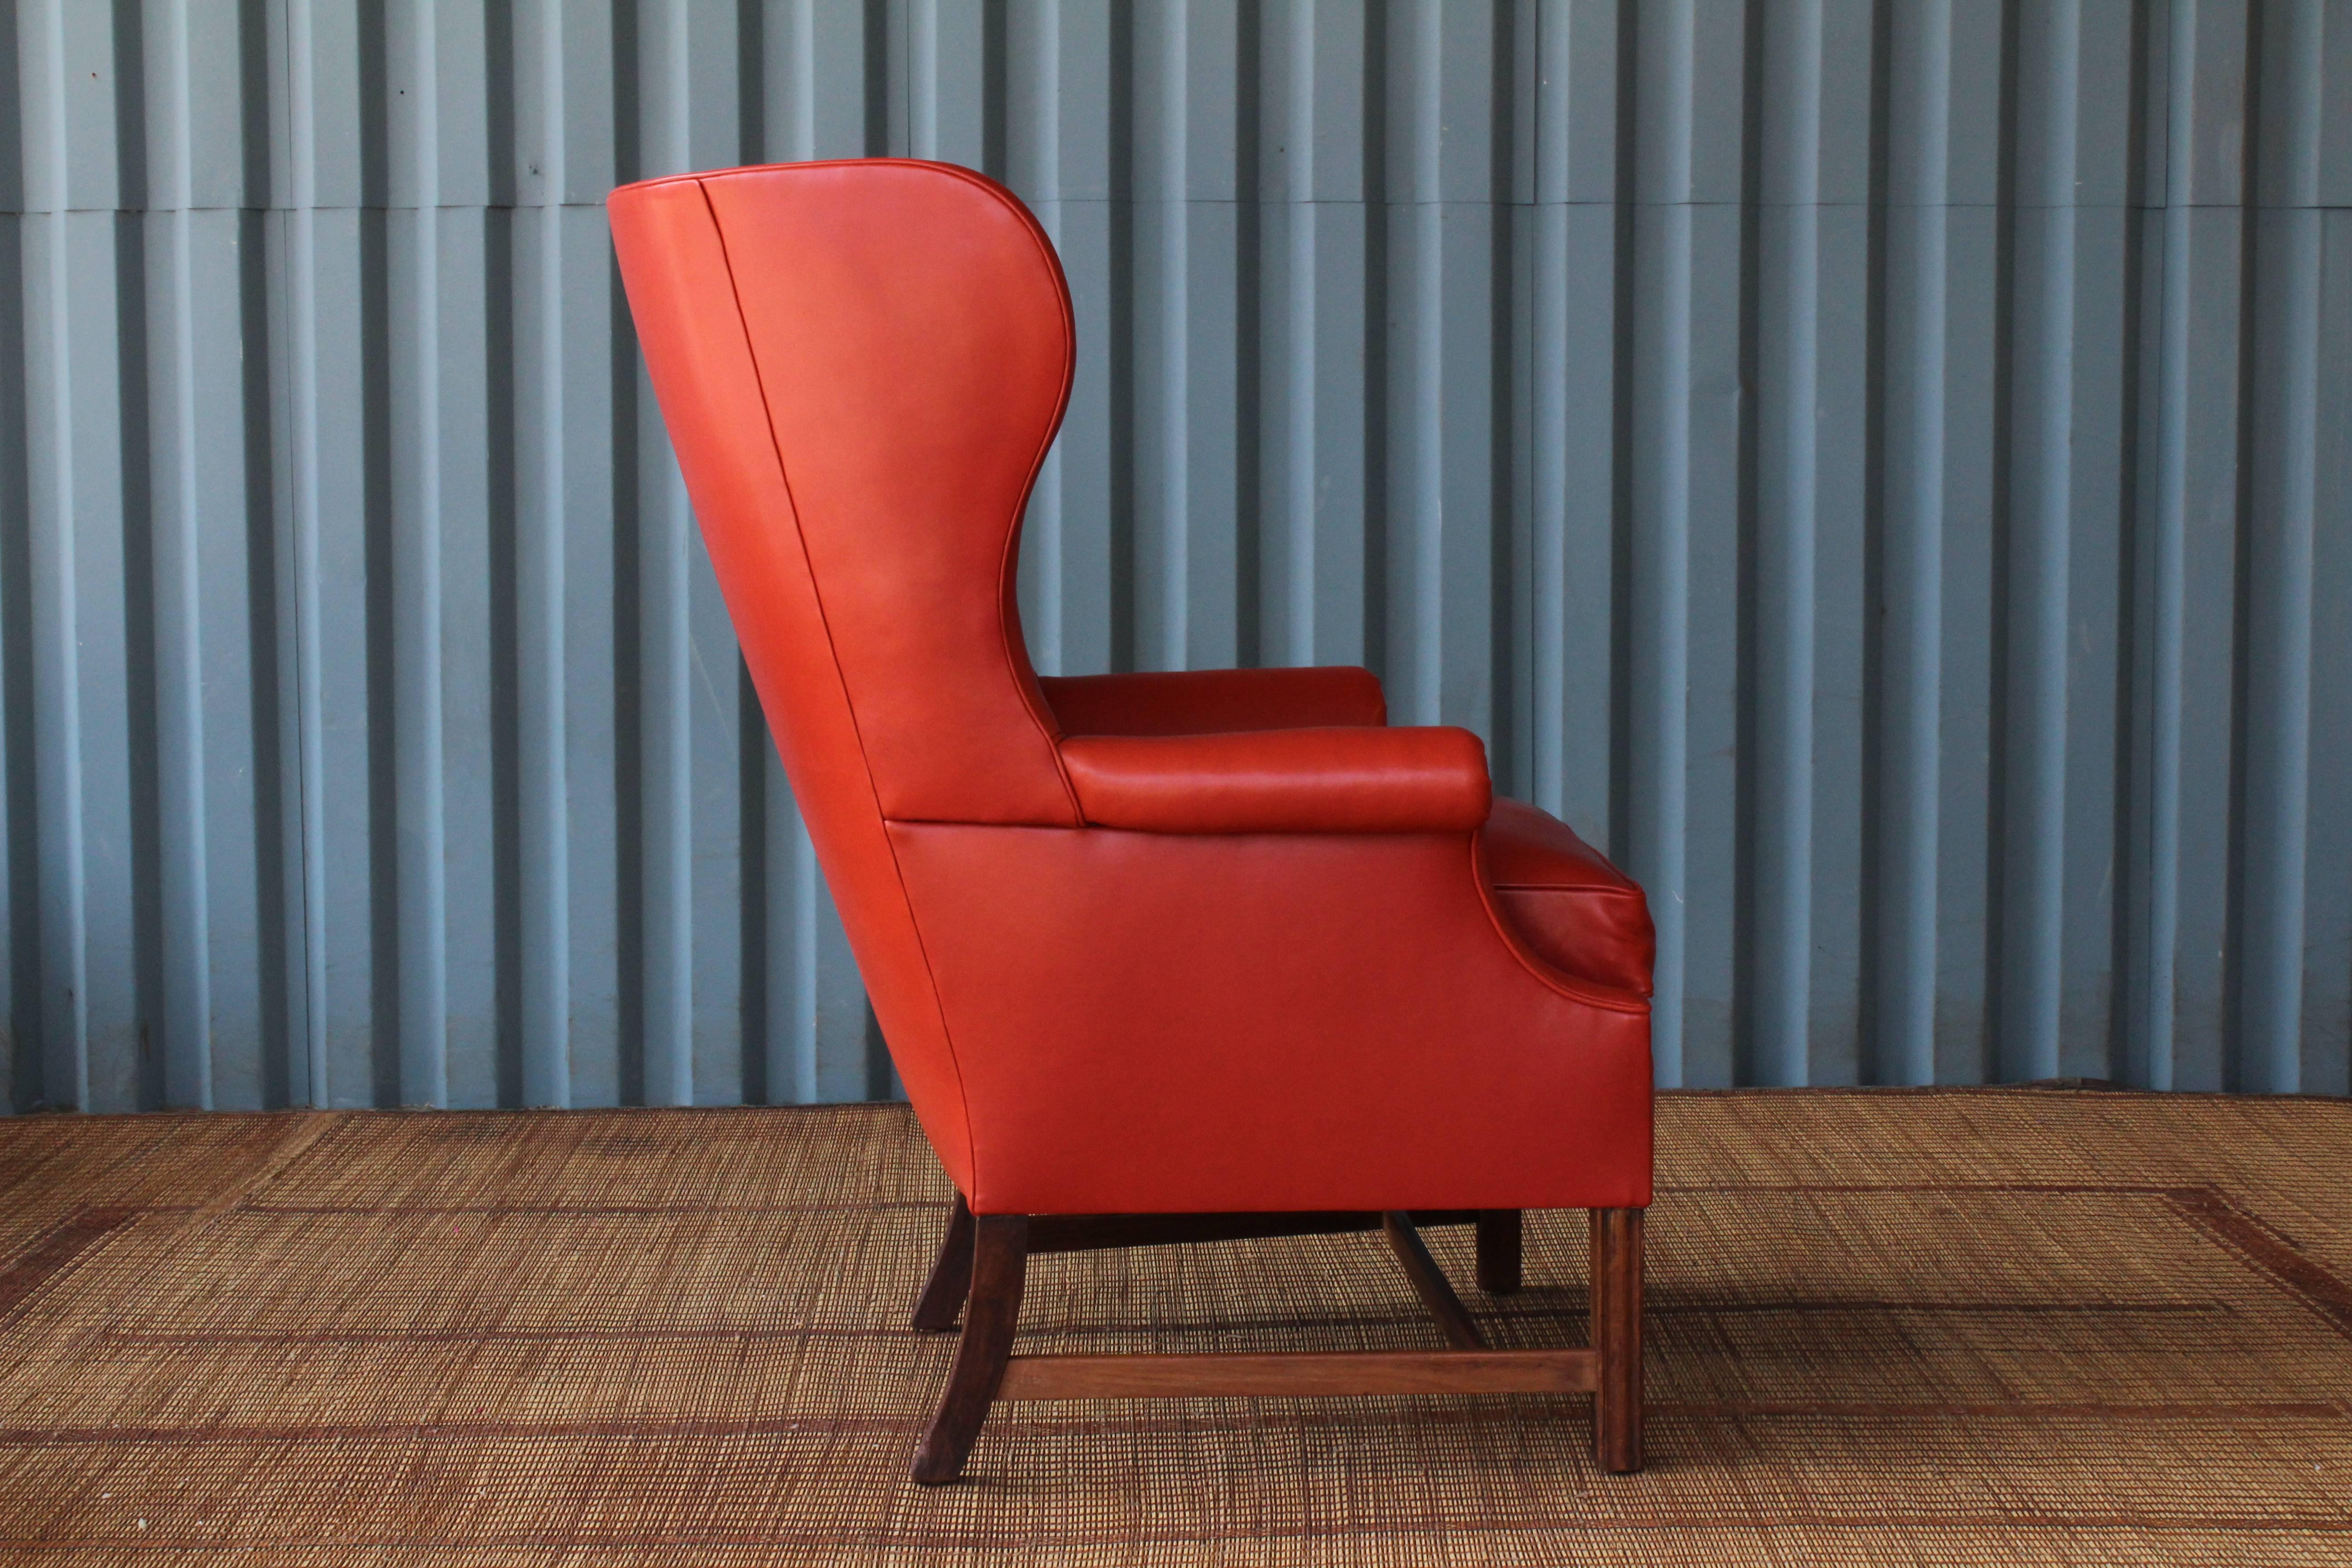 1940s wingback armchair featuring new orange leather upholstery. Walnut base shows signs of age appropriate wear. Leather is soft and in excellent condition.